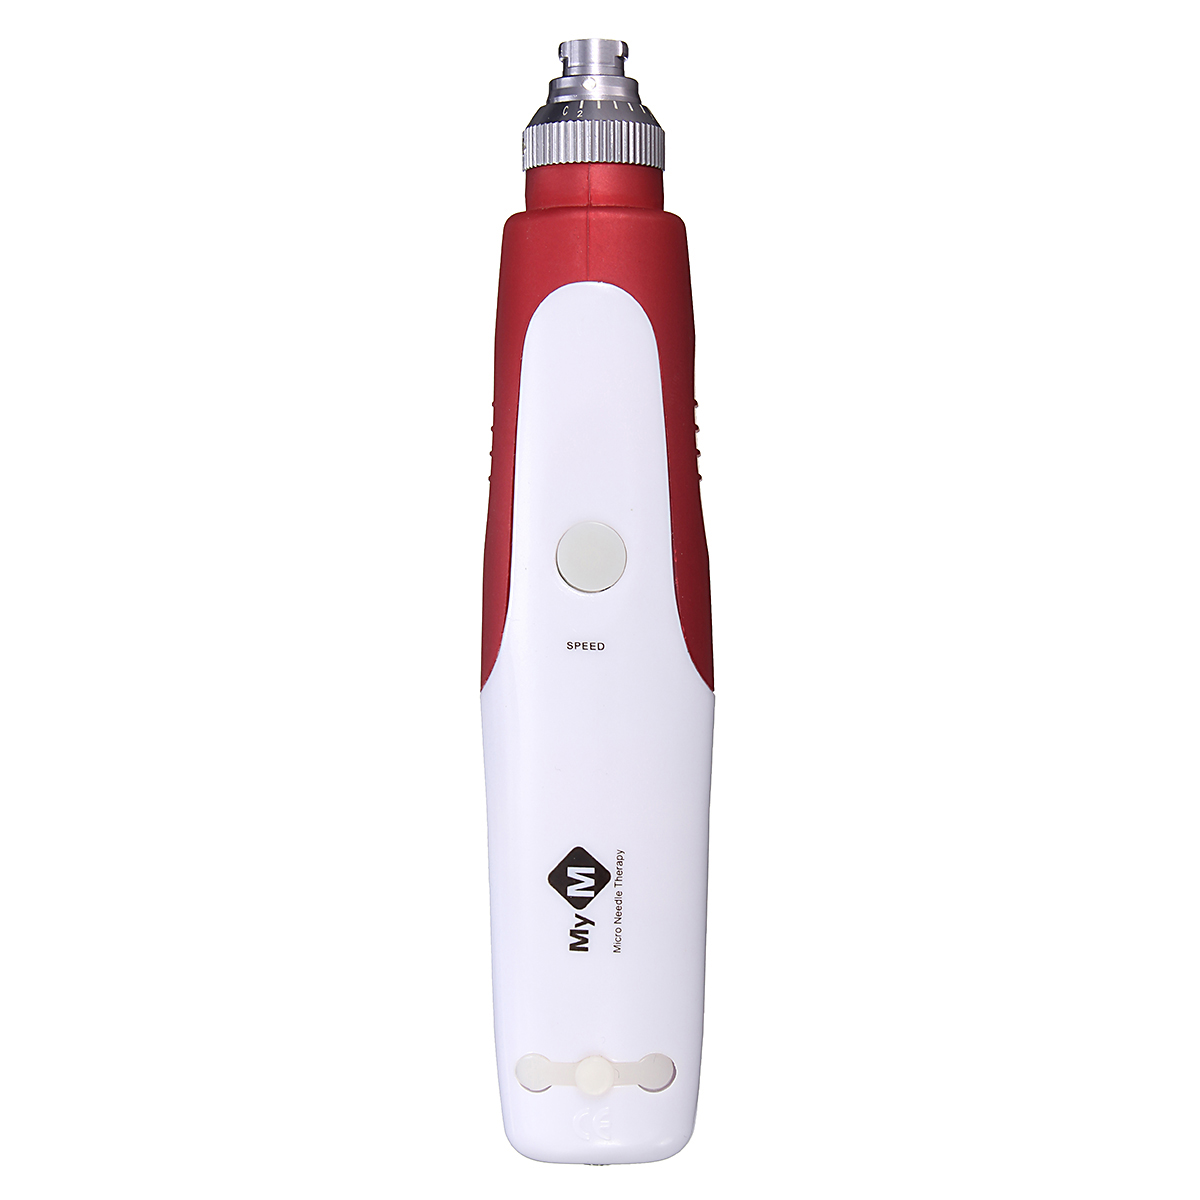 Electric-Auto-Derma-Pen-Micro-Needle-Stamp-Skin-Roller-Anti-Aging-Skin-Care-Facial-Therapy-Tool-1117410